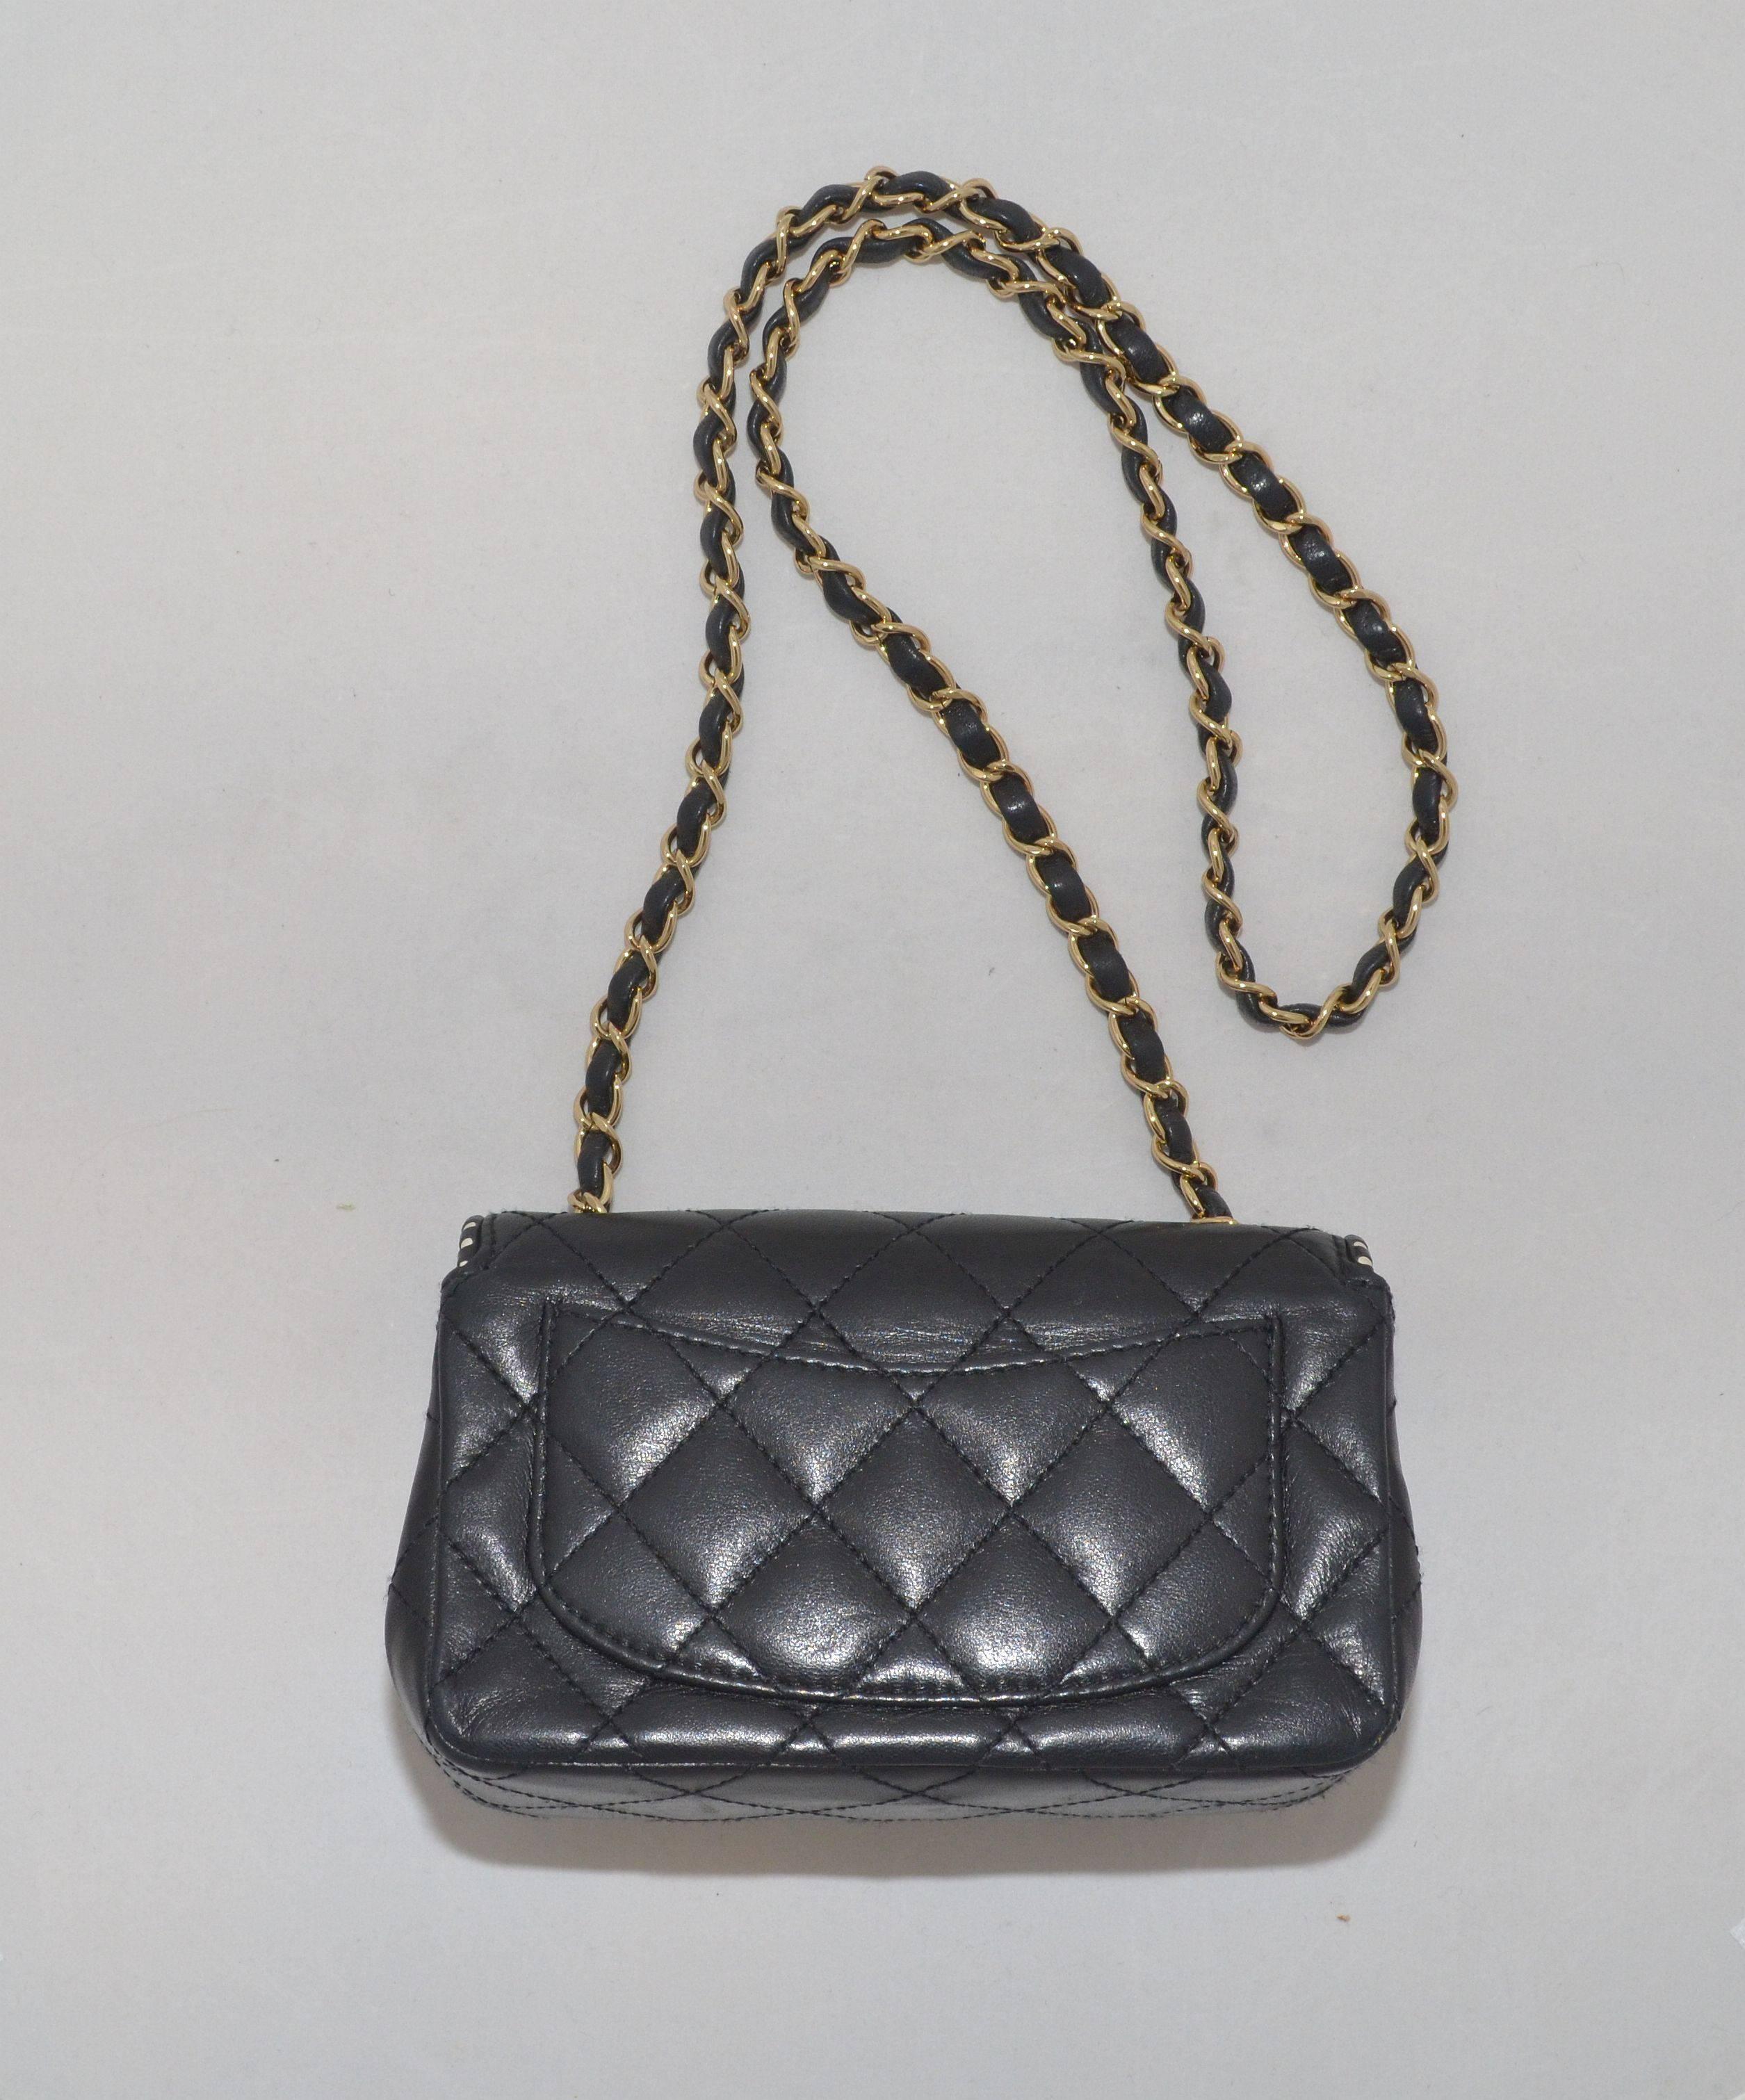 Chanel bag has gold-tone hardware, signature CC turn-lock closure, and a white and black striped trim along the flap opening. interior is lined in leather and has one slip pocket. Dust bag is included. Made in France.

Measurements:
7.25'' x